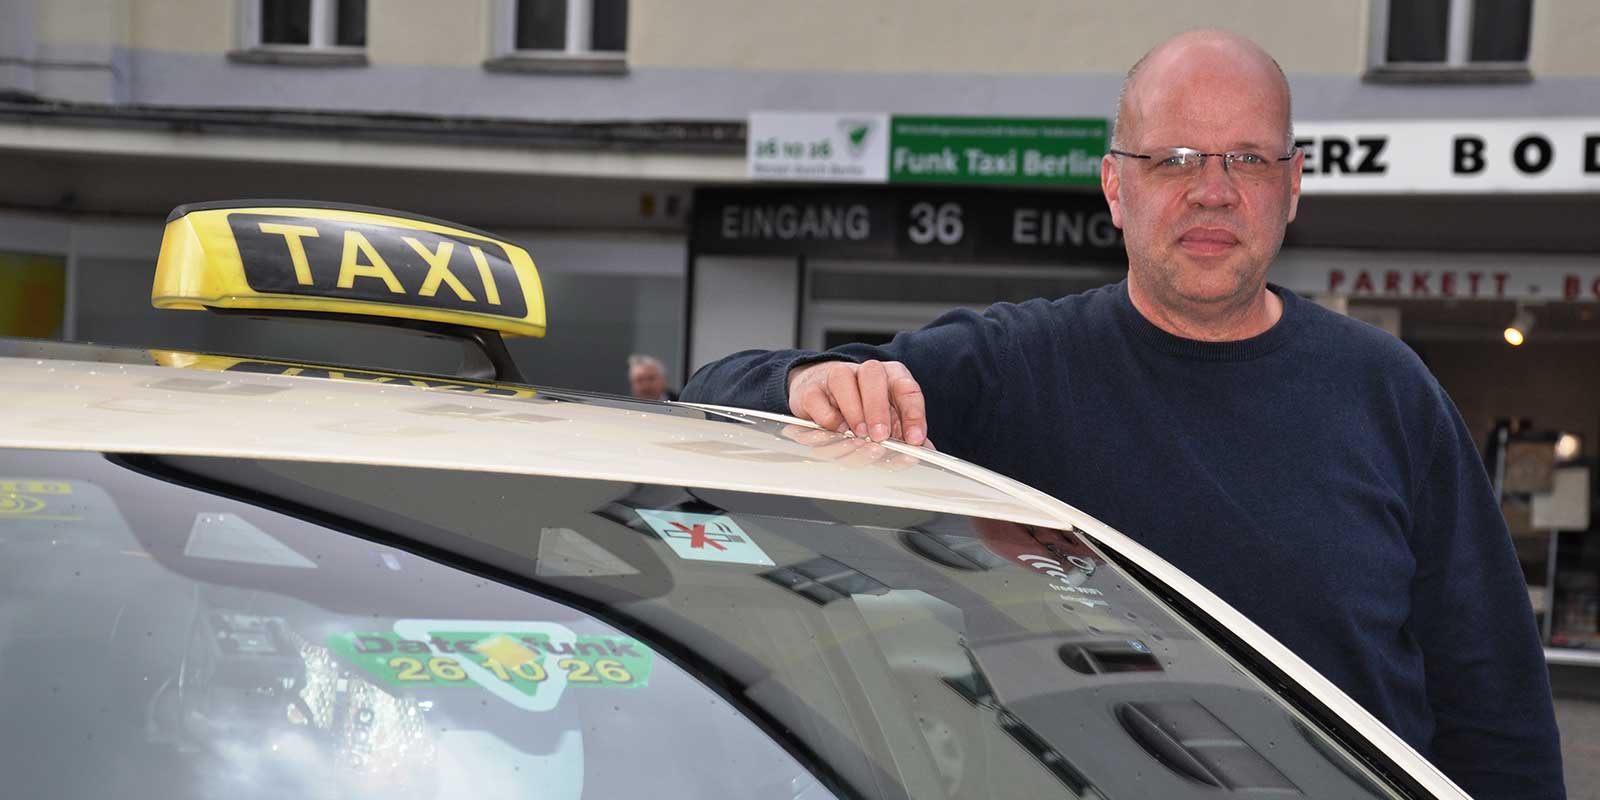 Featured image for “So geht Taxi! Thomas Dahl im Interview mit 261026”